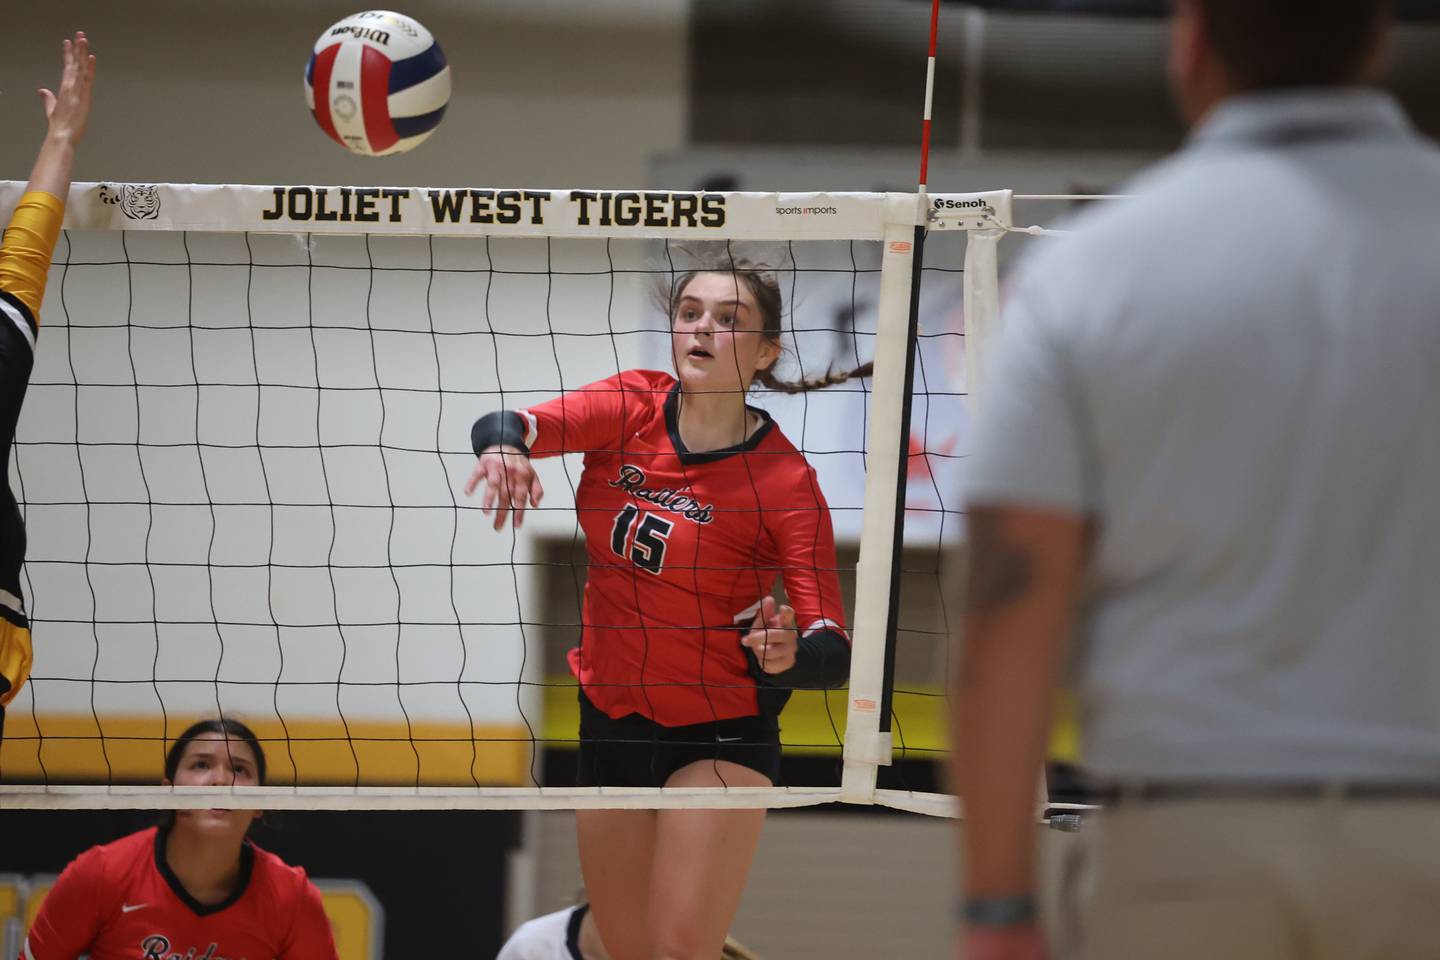 Bolingbrook’s Madison Shroba eyes her shot against Joliet West. Tuesday, Aug. 23, 2022, in Joliet.